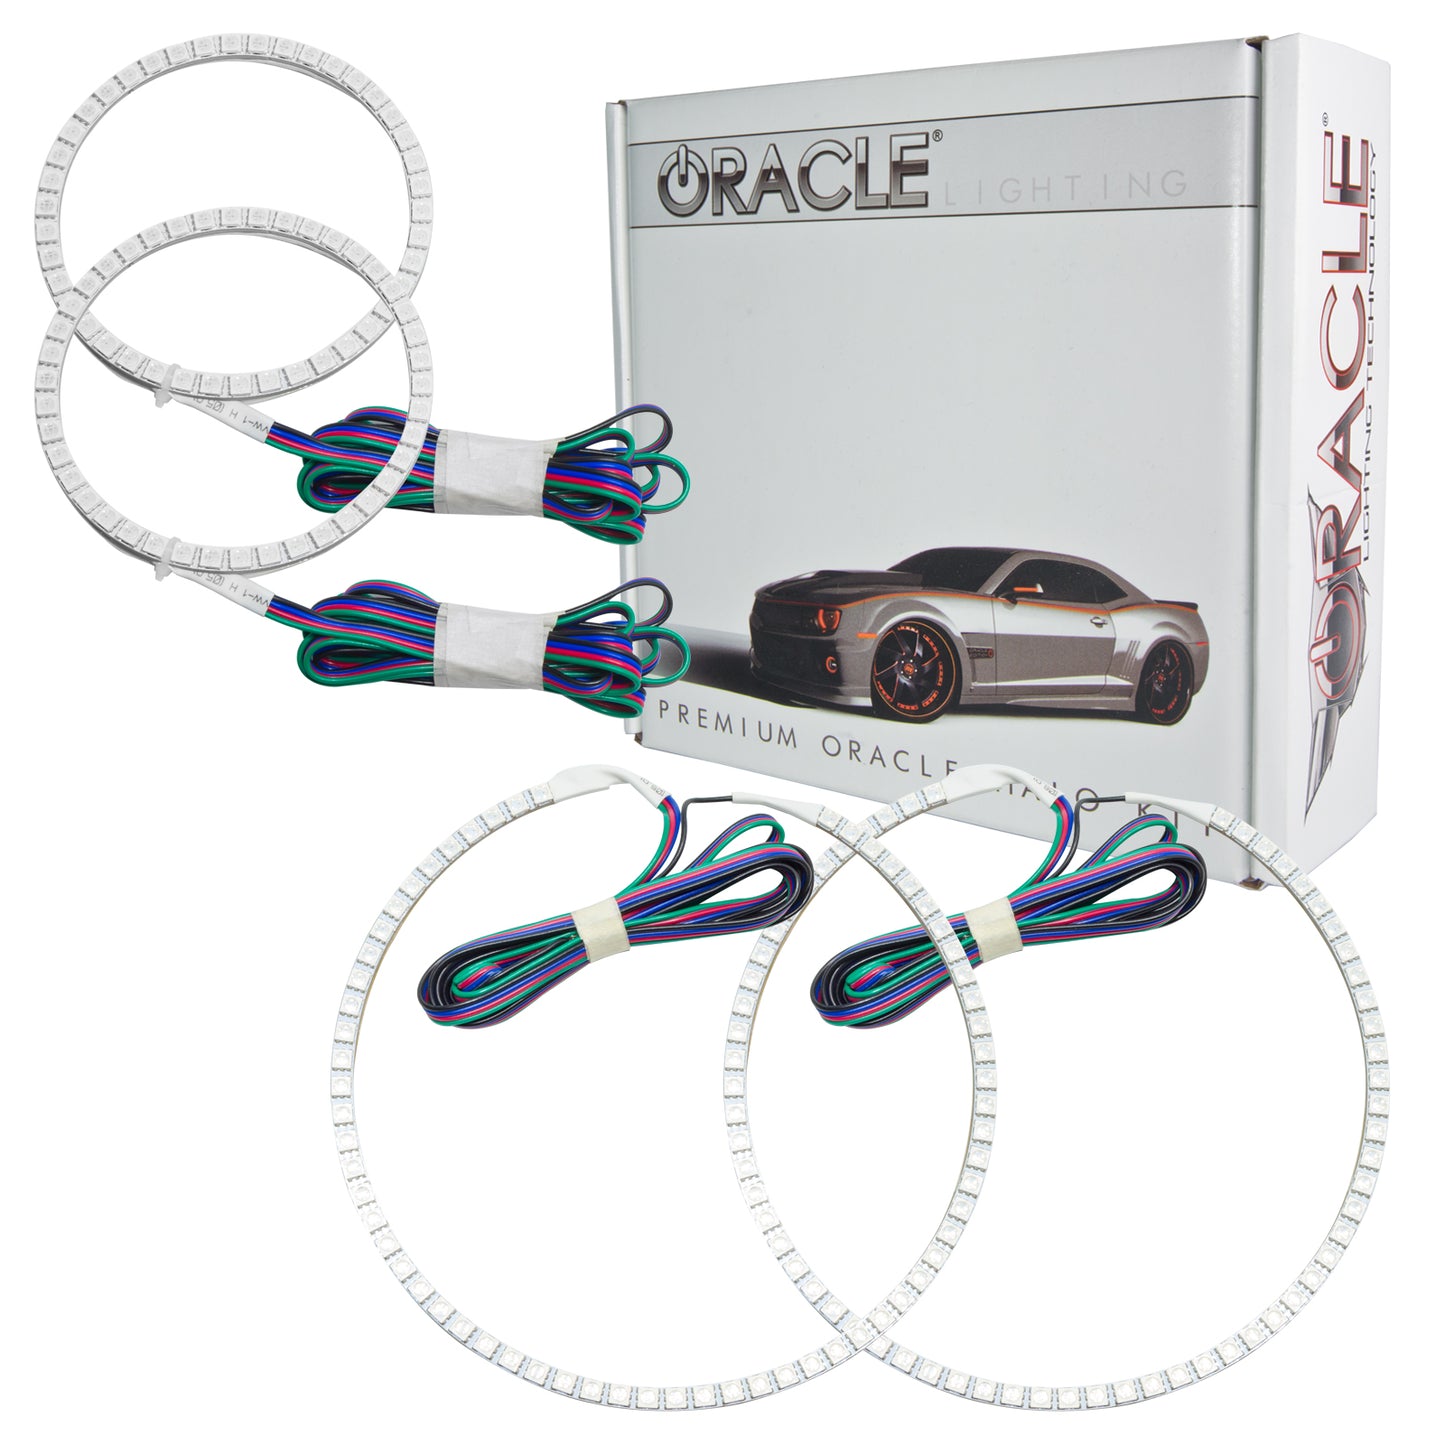 Oracle Lighting 2414-333 - Lincoln Mark LT 2006-2007 ORACLE ColorSHIFT Halo Kit